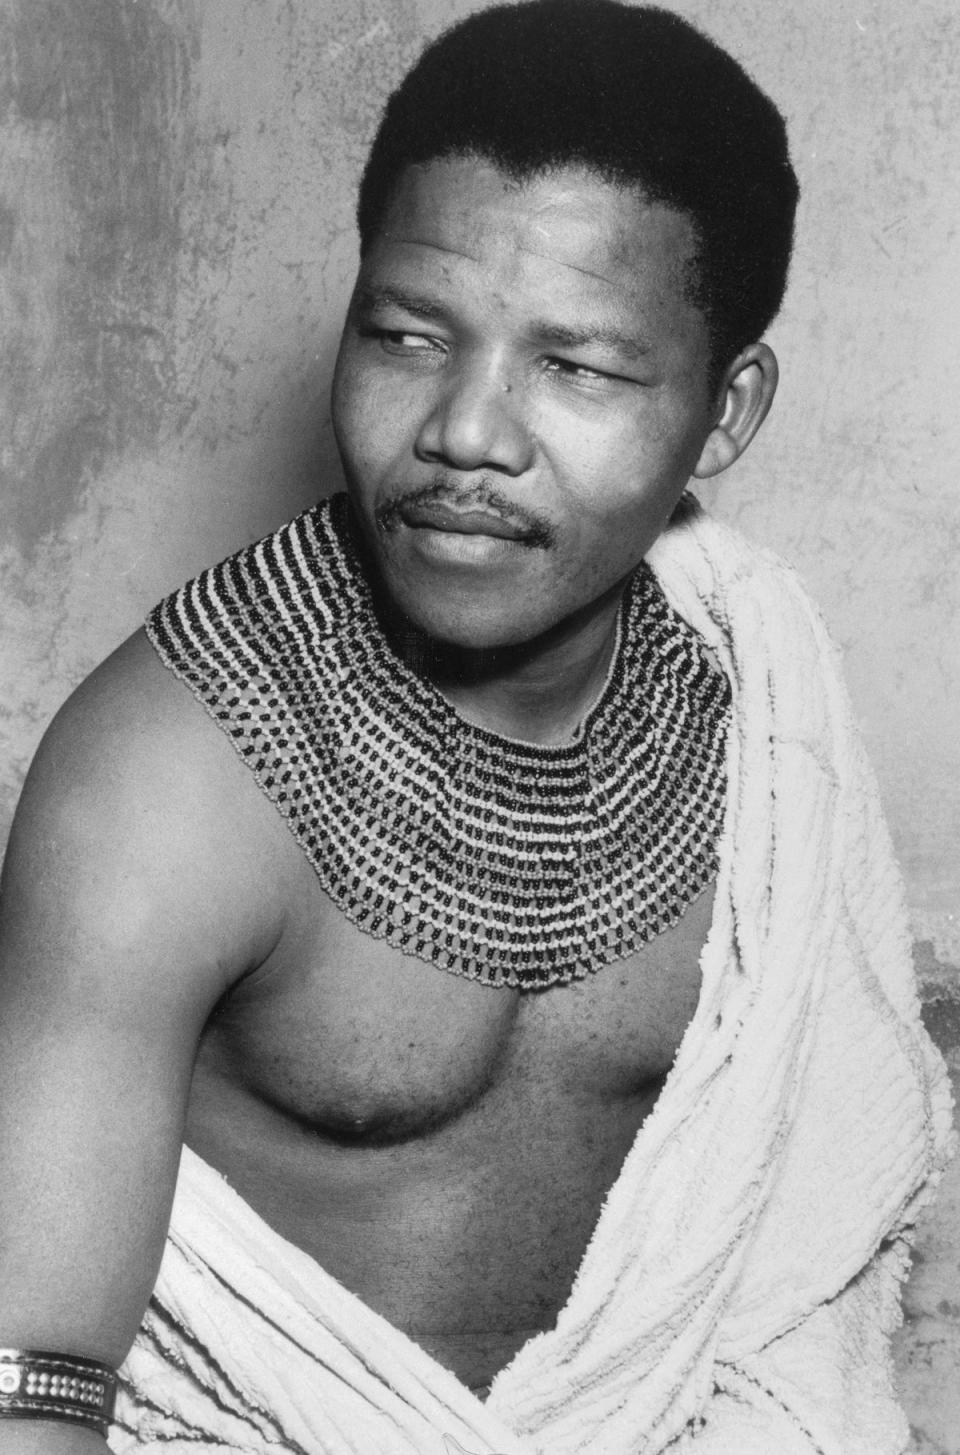 Nelson Mandela wearing traditional beads and a bed spread during his time in hiding from the police, South Africa, 1961 (Getty Images)